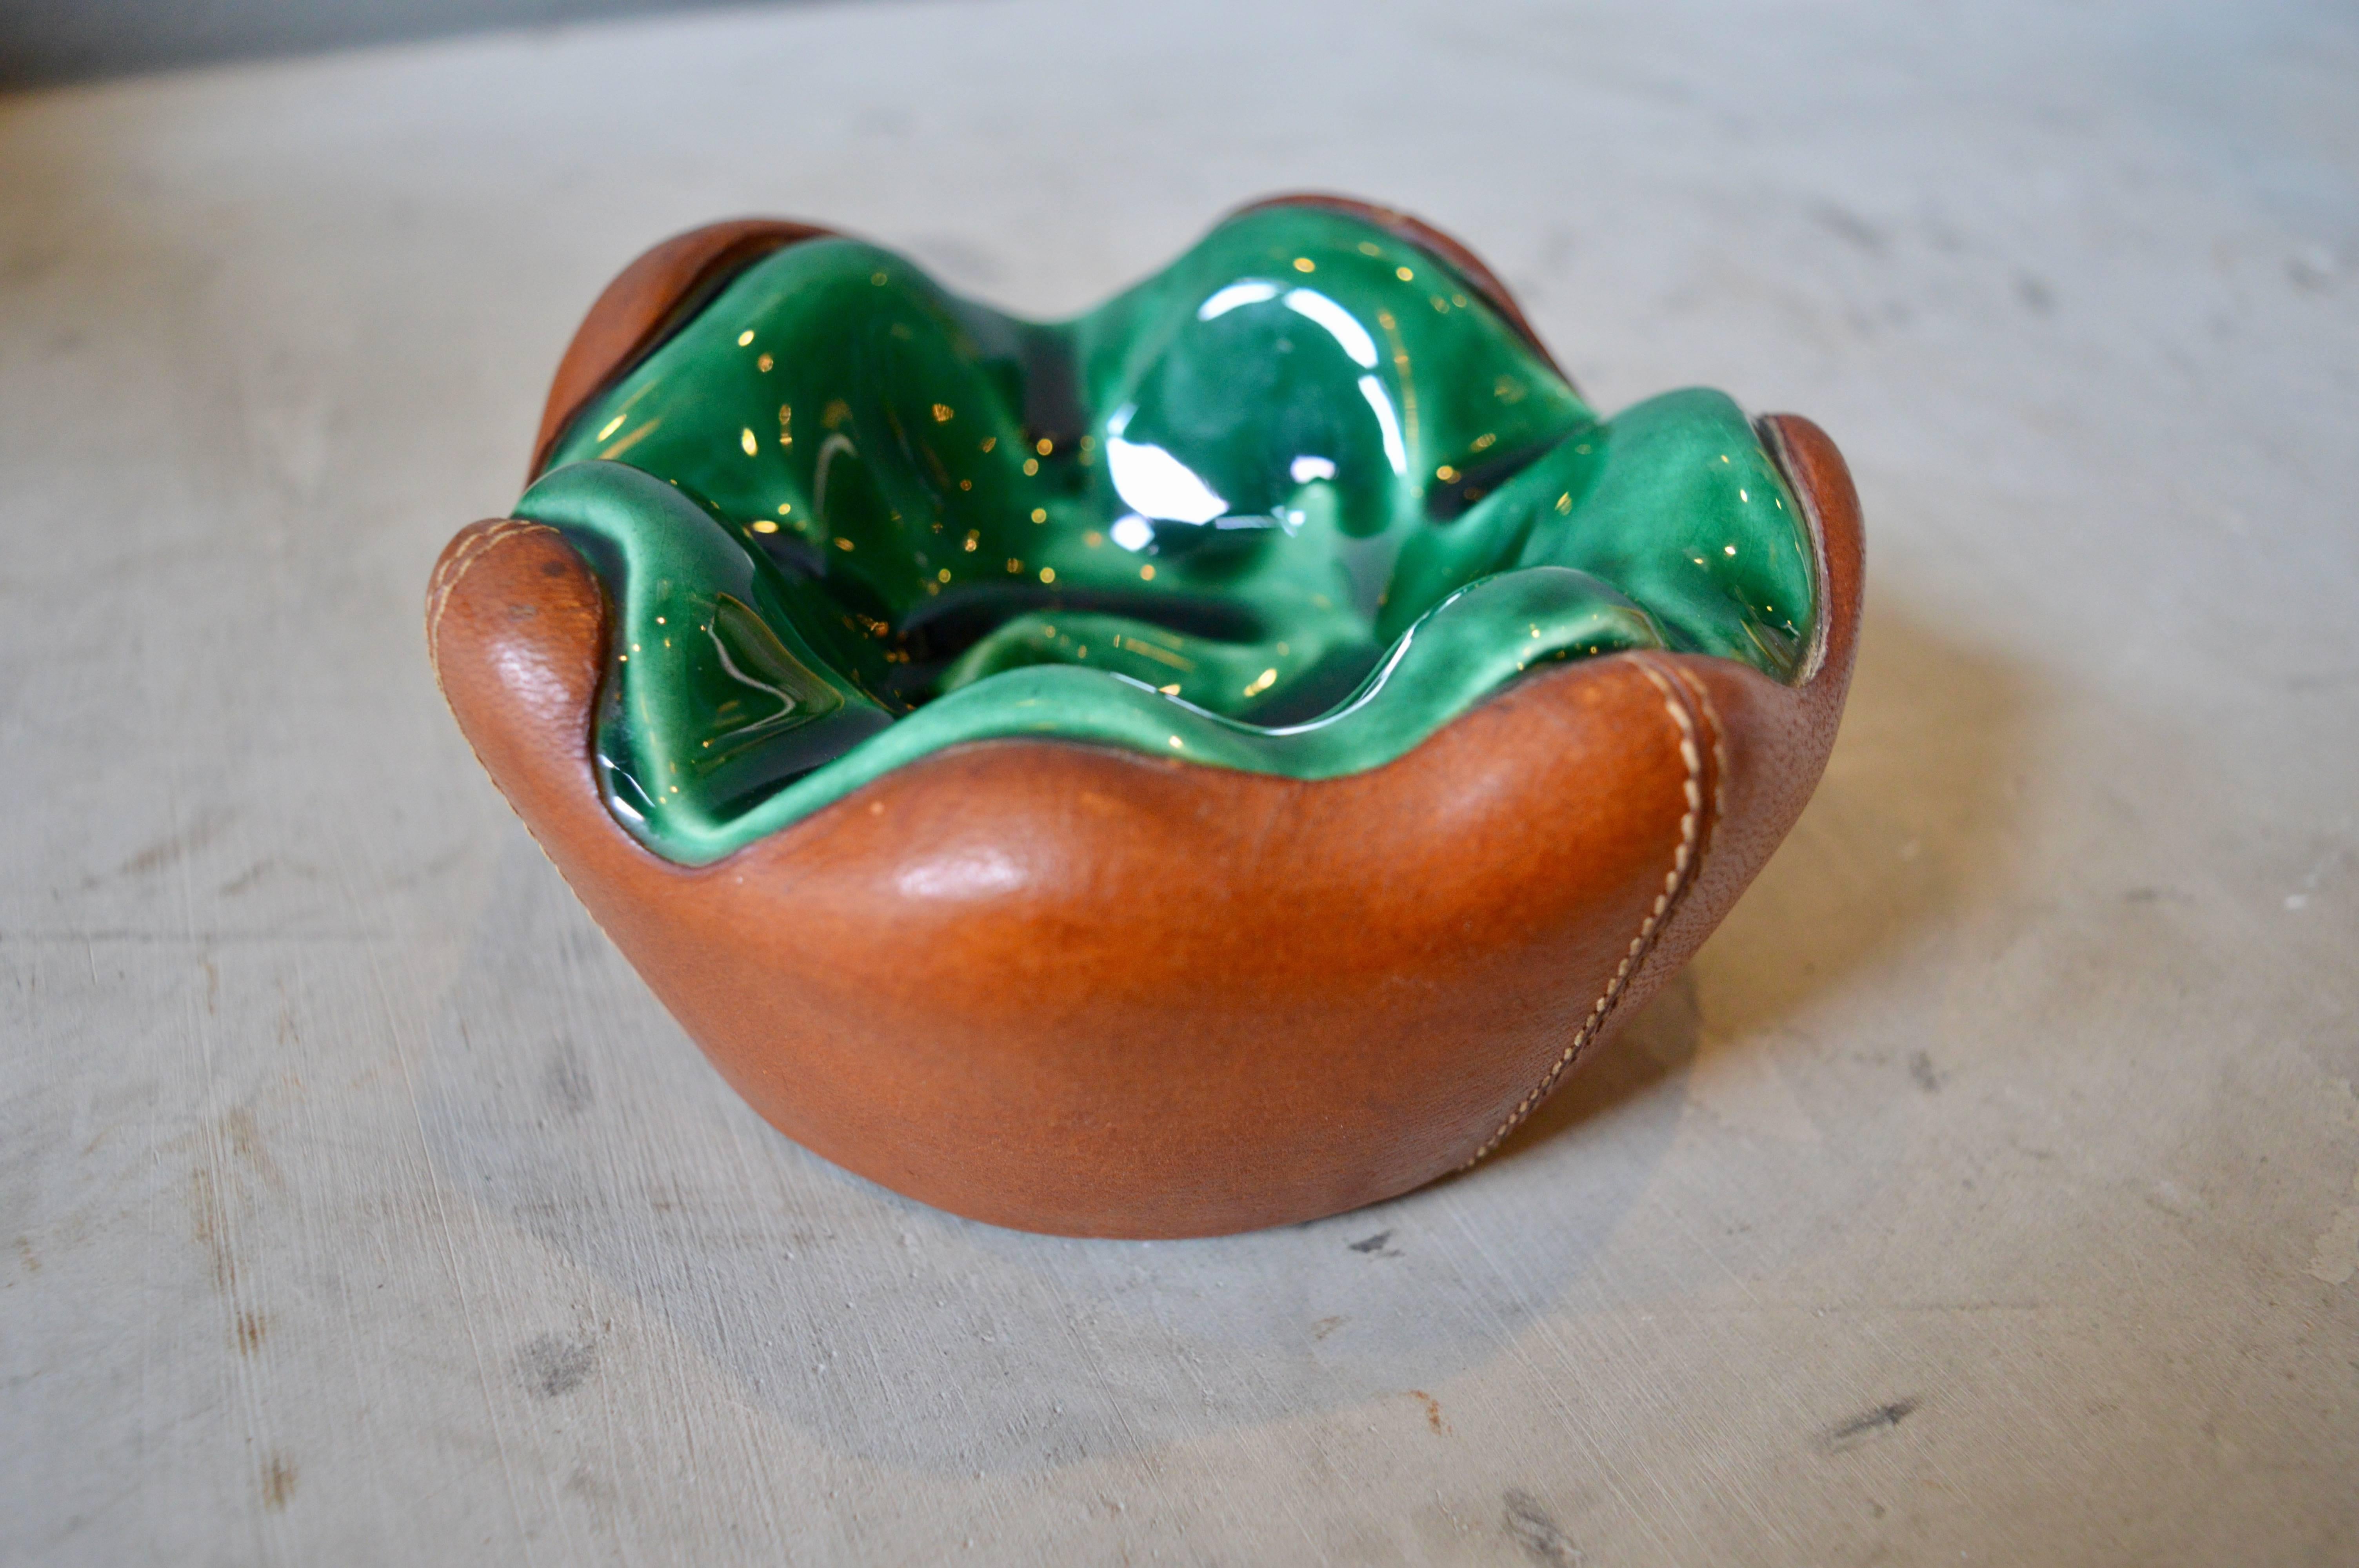 Handsome leather and ceramic ashtray or catchall in the style of Jacques Adnet. French saddle leather with hand stitching. Stunning green ceramic inset dish. Excellent vintage condition.